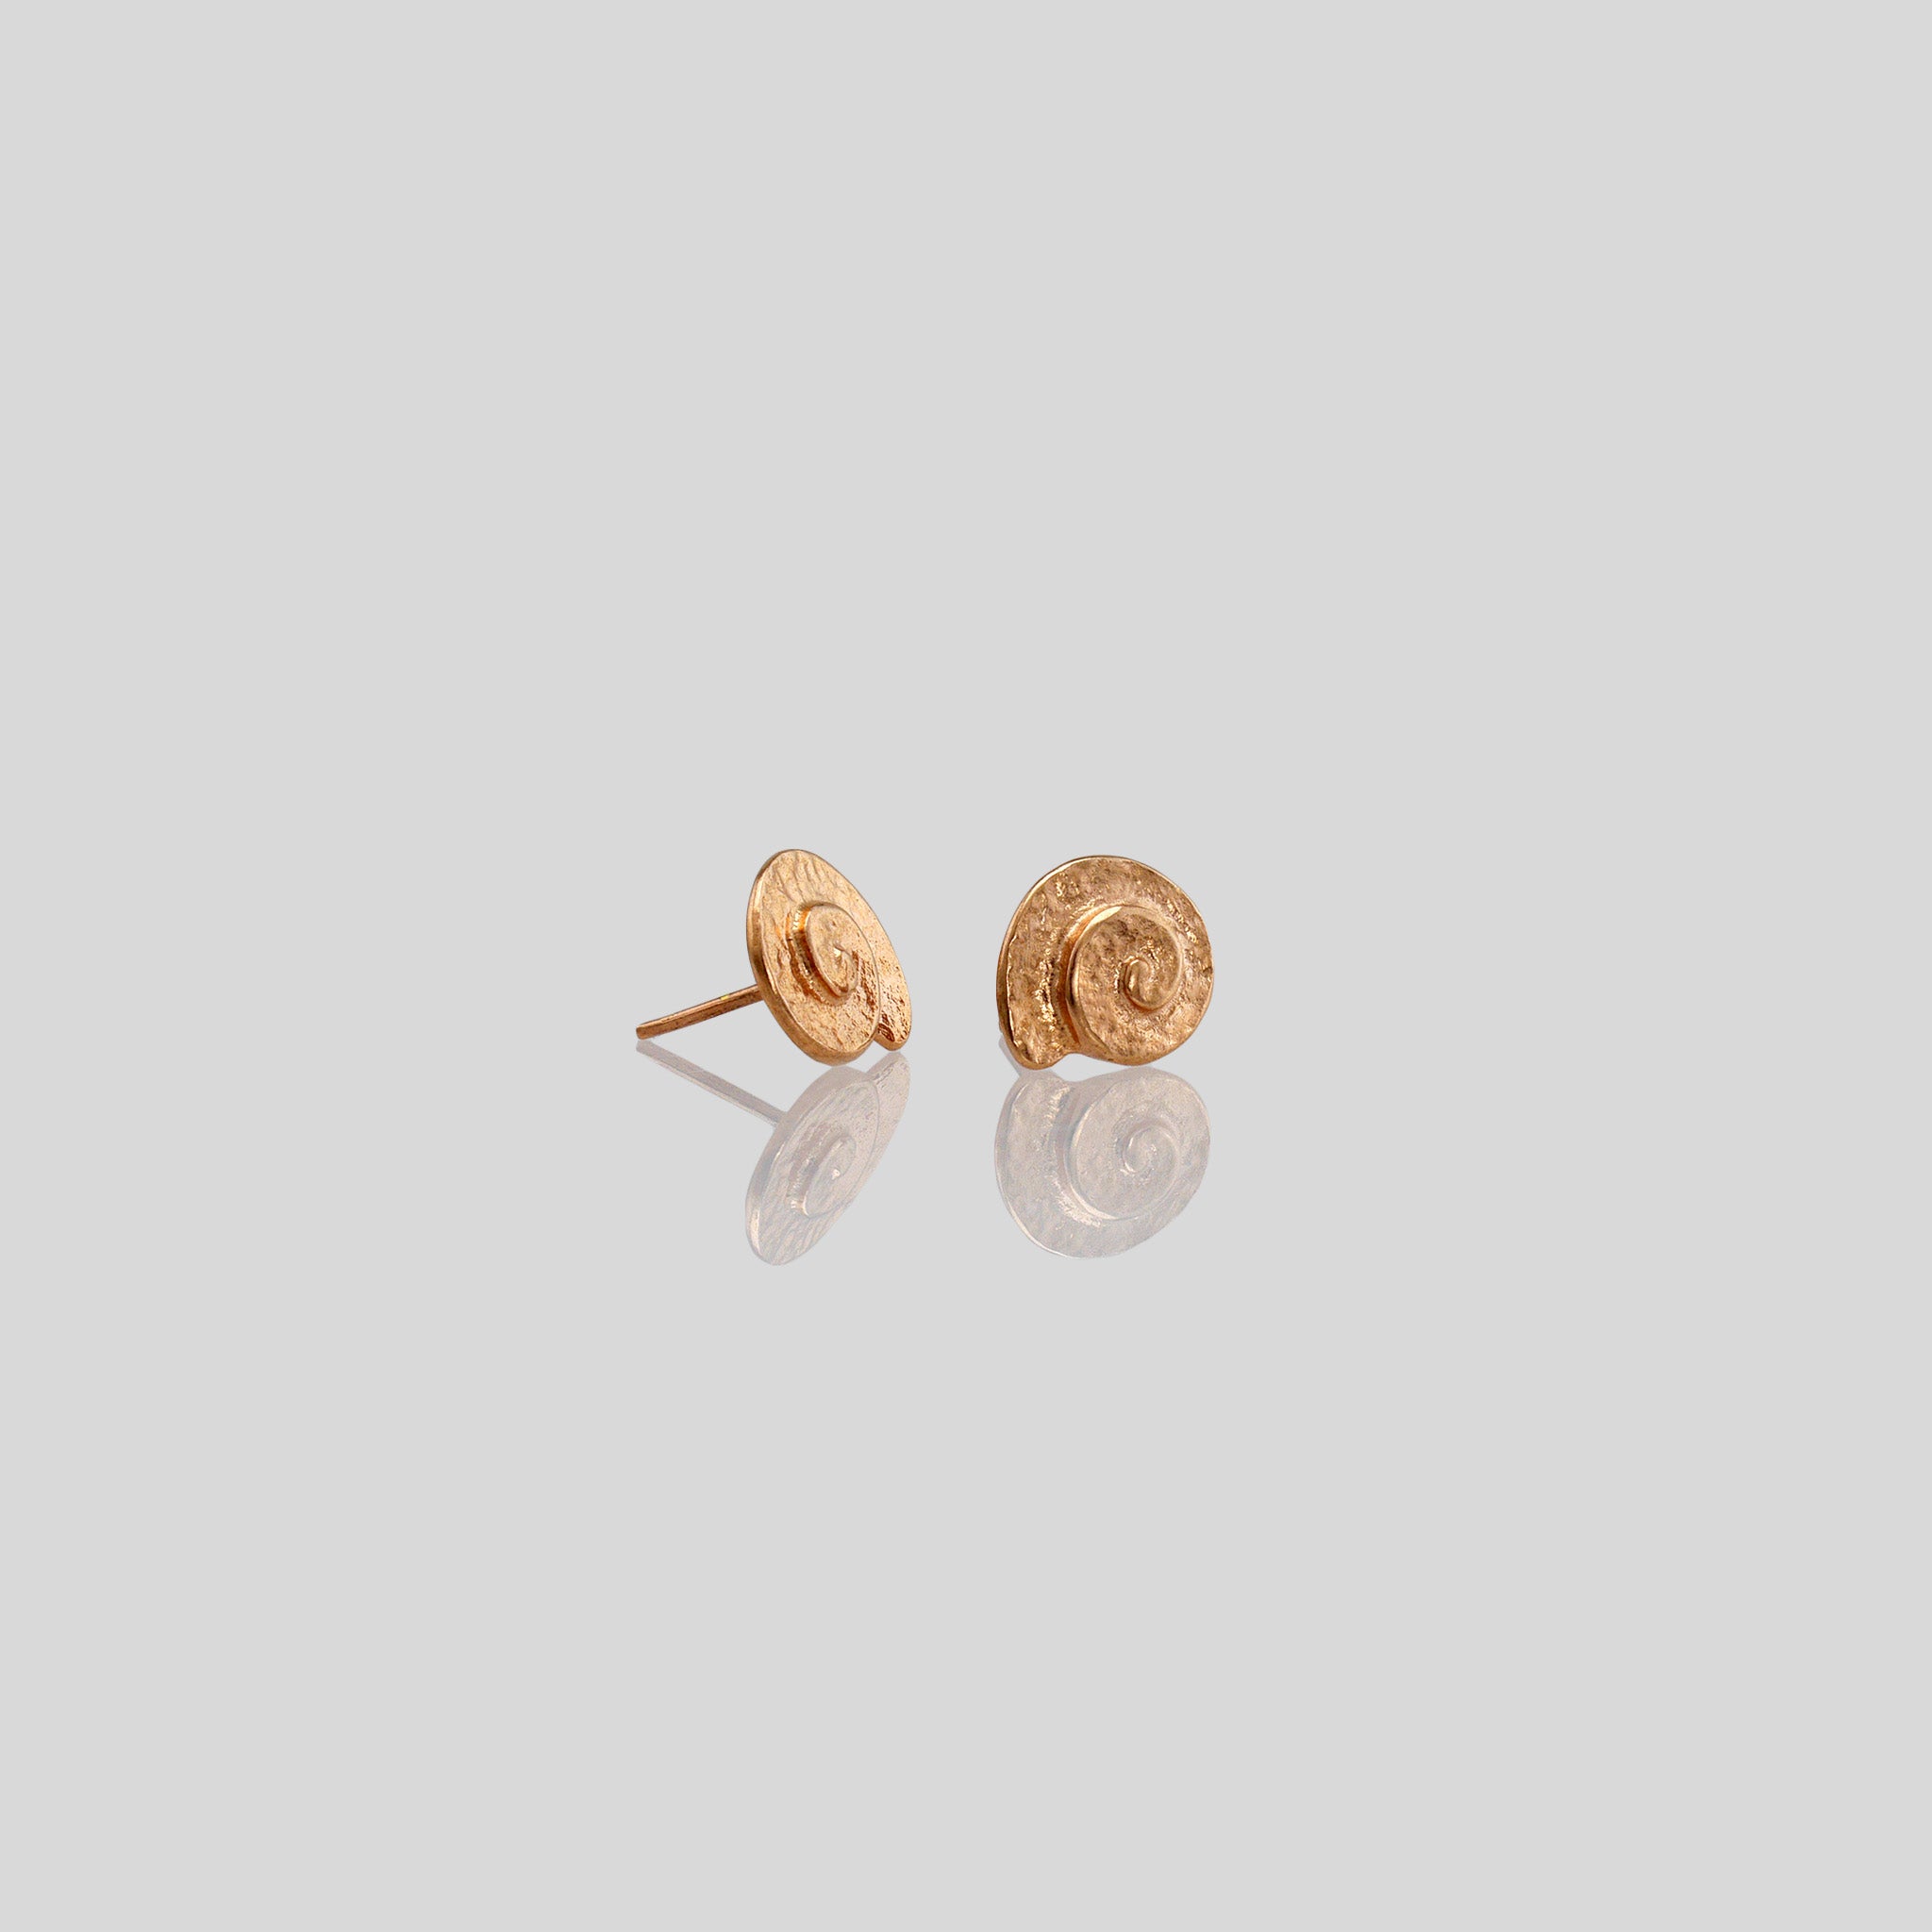 Classic and elegant Rose gold stud earrings with a textured arched spiral.